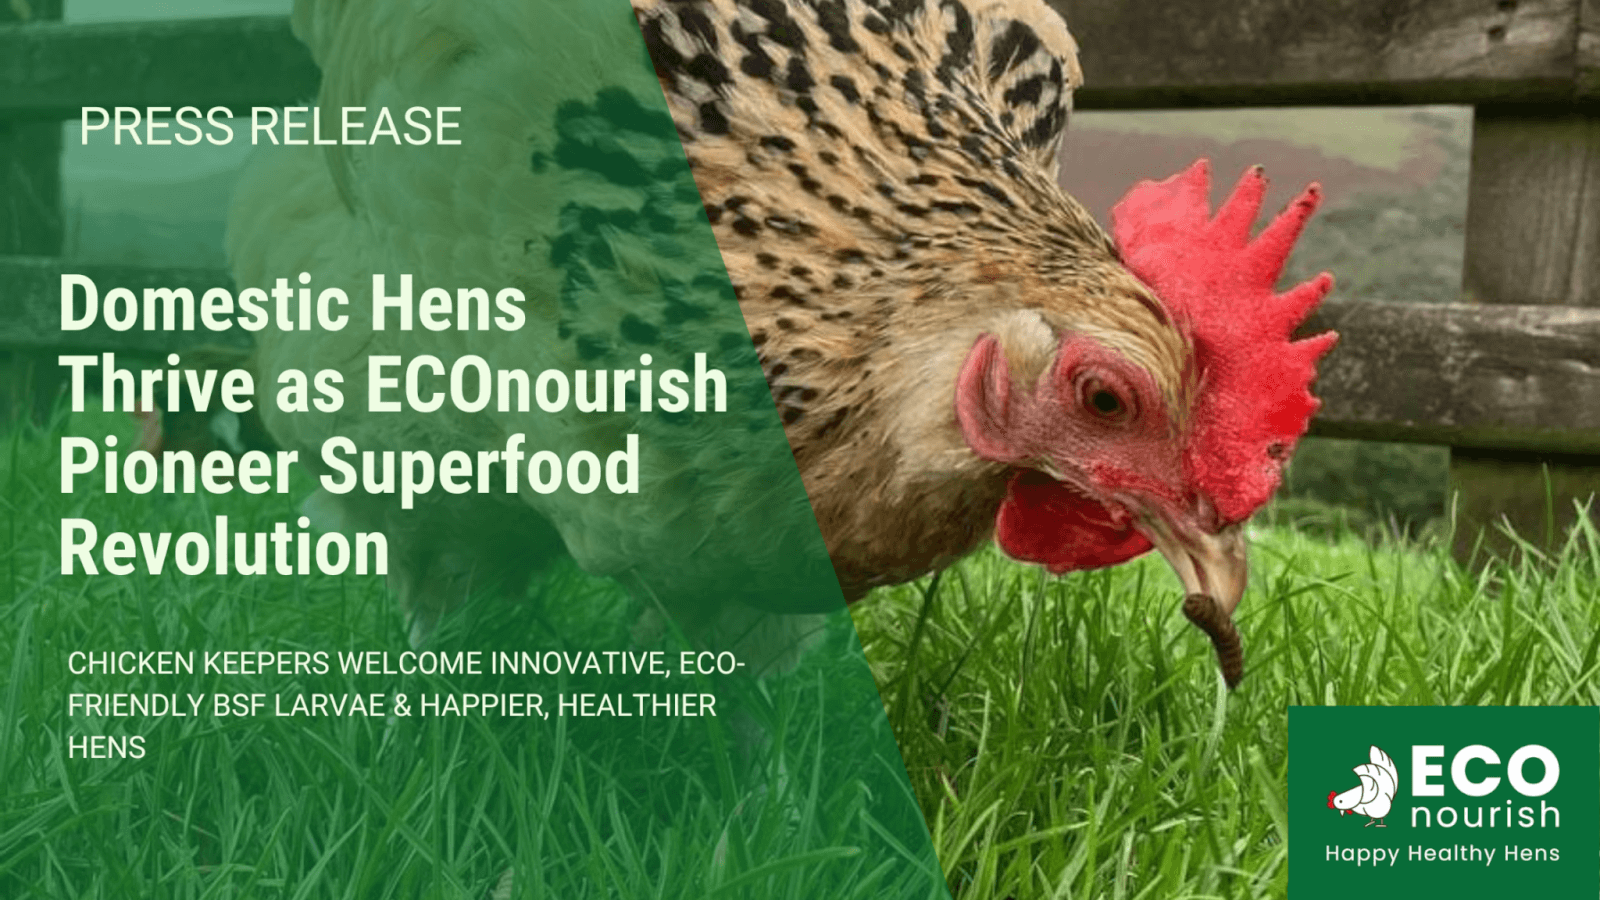 Domestic Hens Thrive as ECOnourish Pioneer Superfood Revolution. Image of hen pecking live BSF larvae.